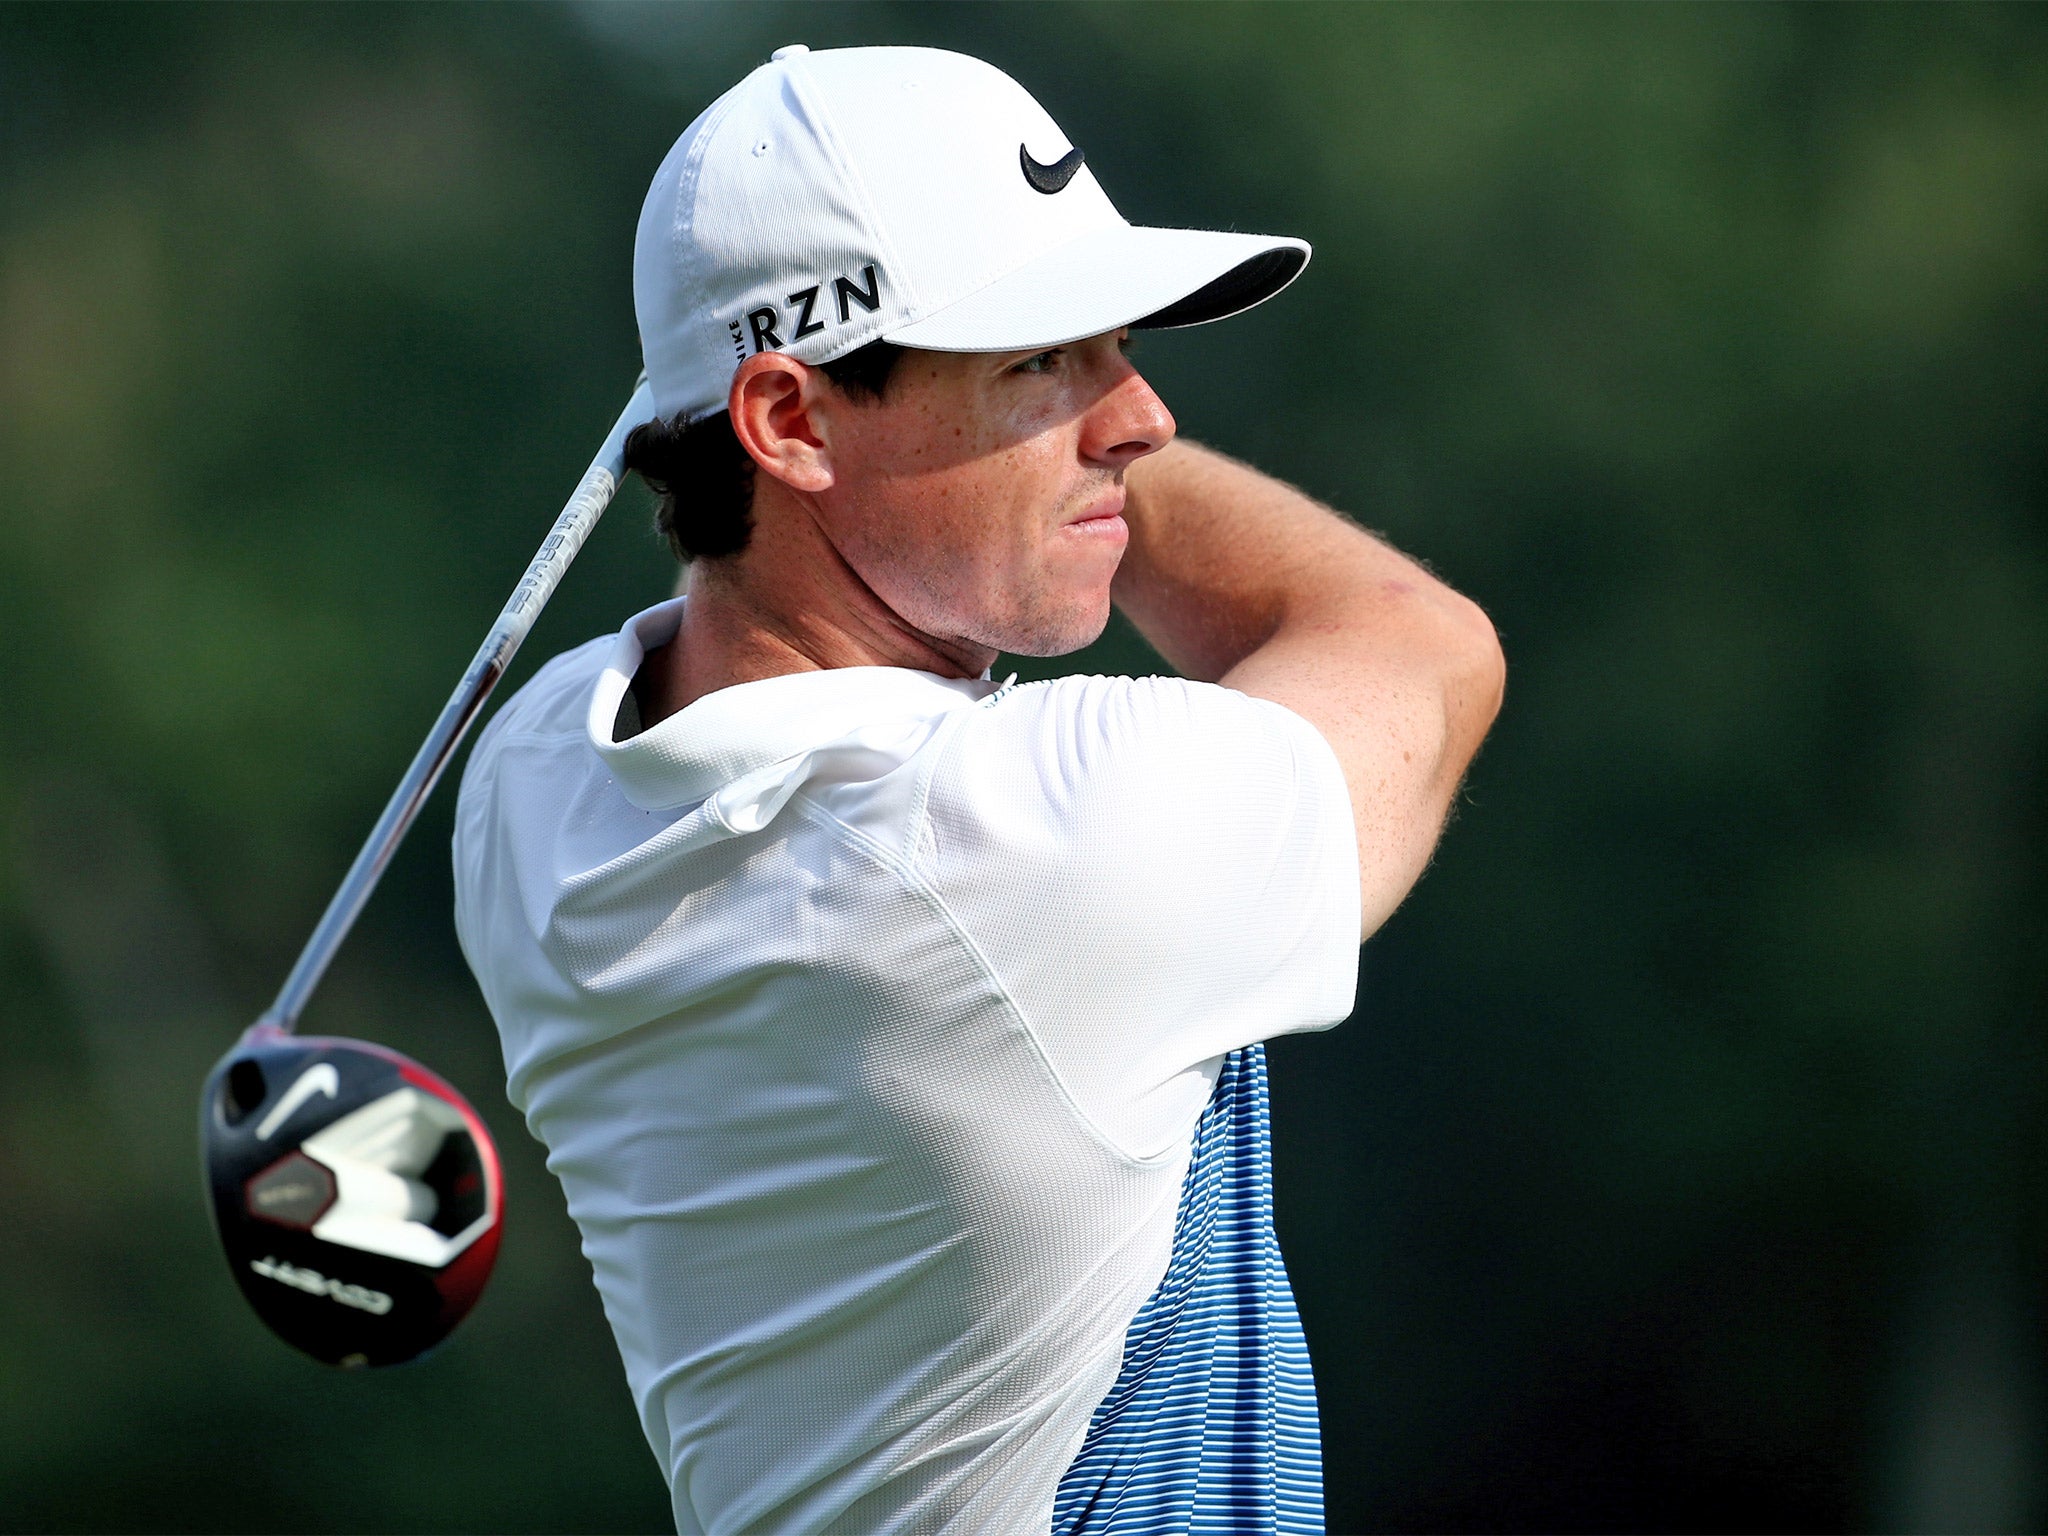 'I love his rhythm, I love his moxie,' said the legendary Jack Nicklaus about Rory McIlroy